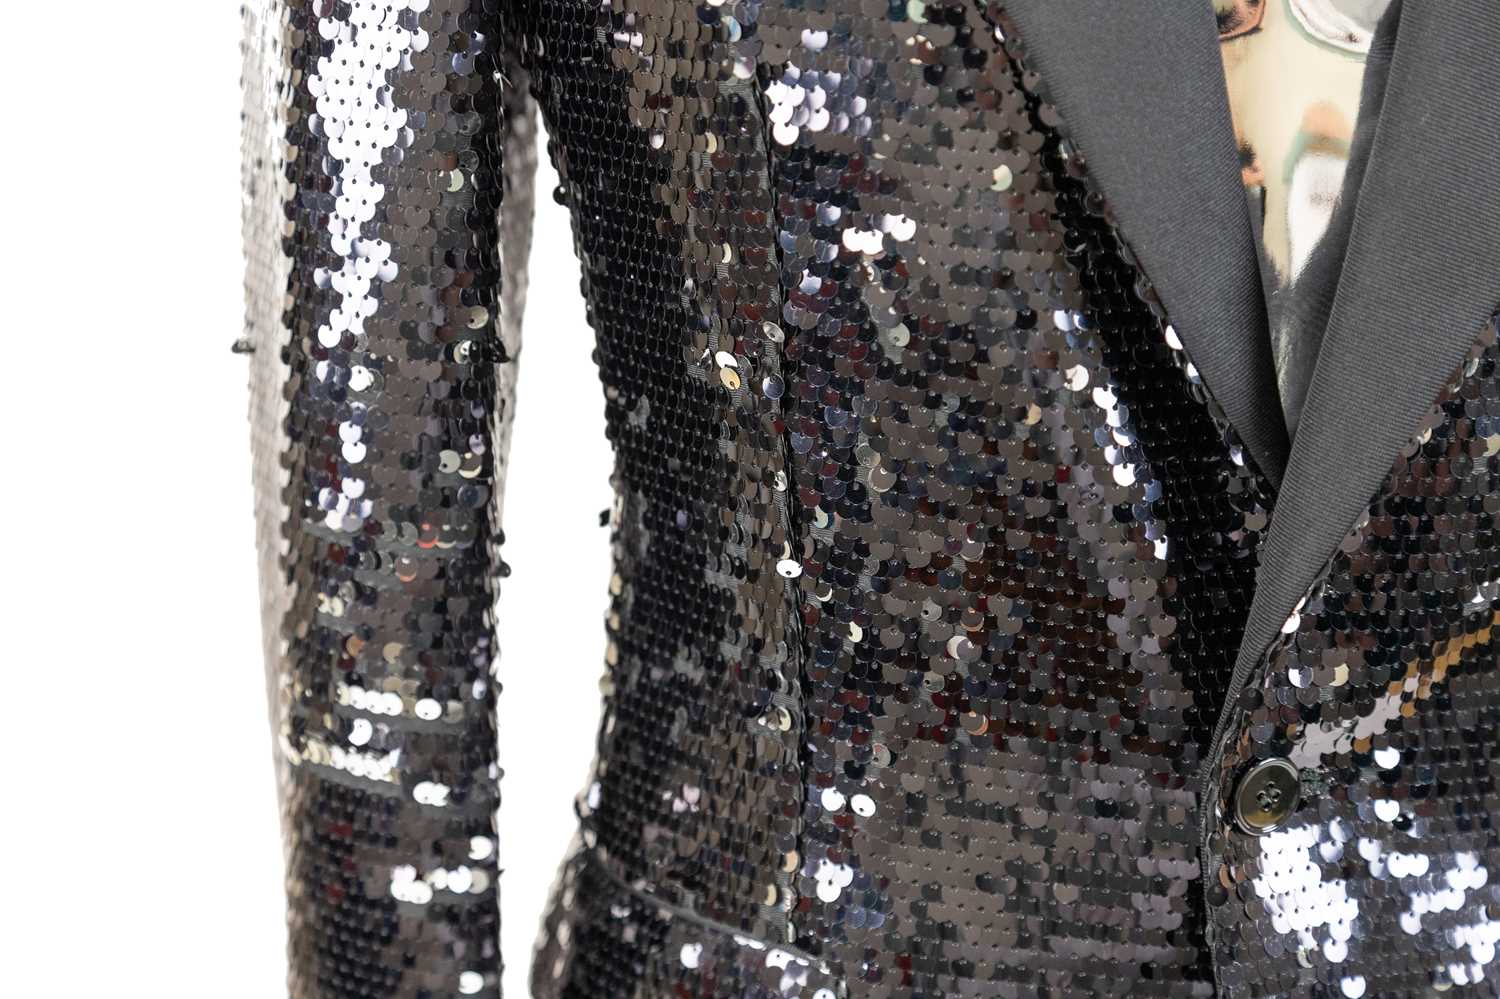 Circa 2009 Dolce & Gabbana Black/Silver Sequin Evening Jacket with single-button fastening, - Image 4 of 4